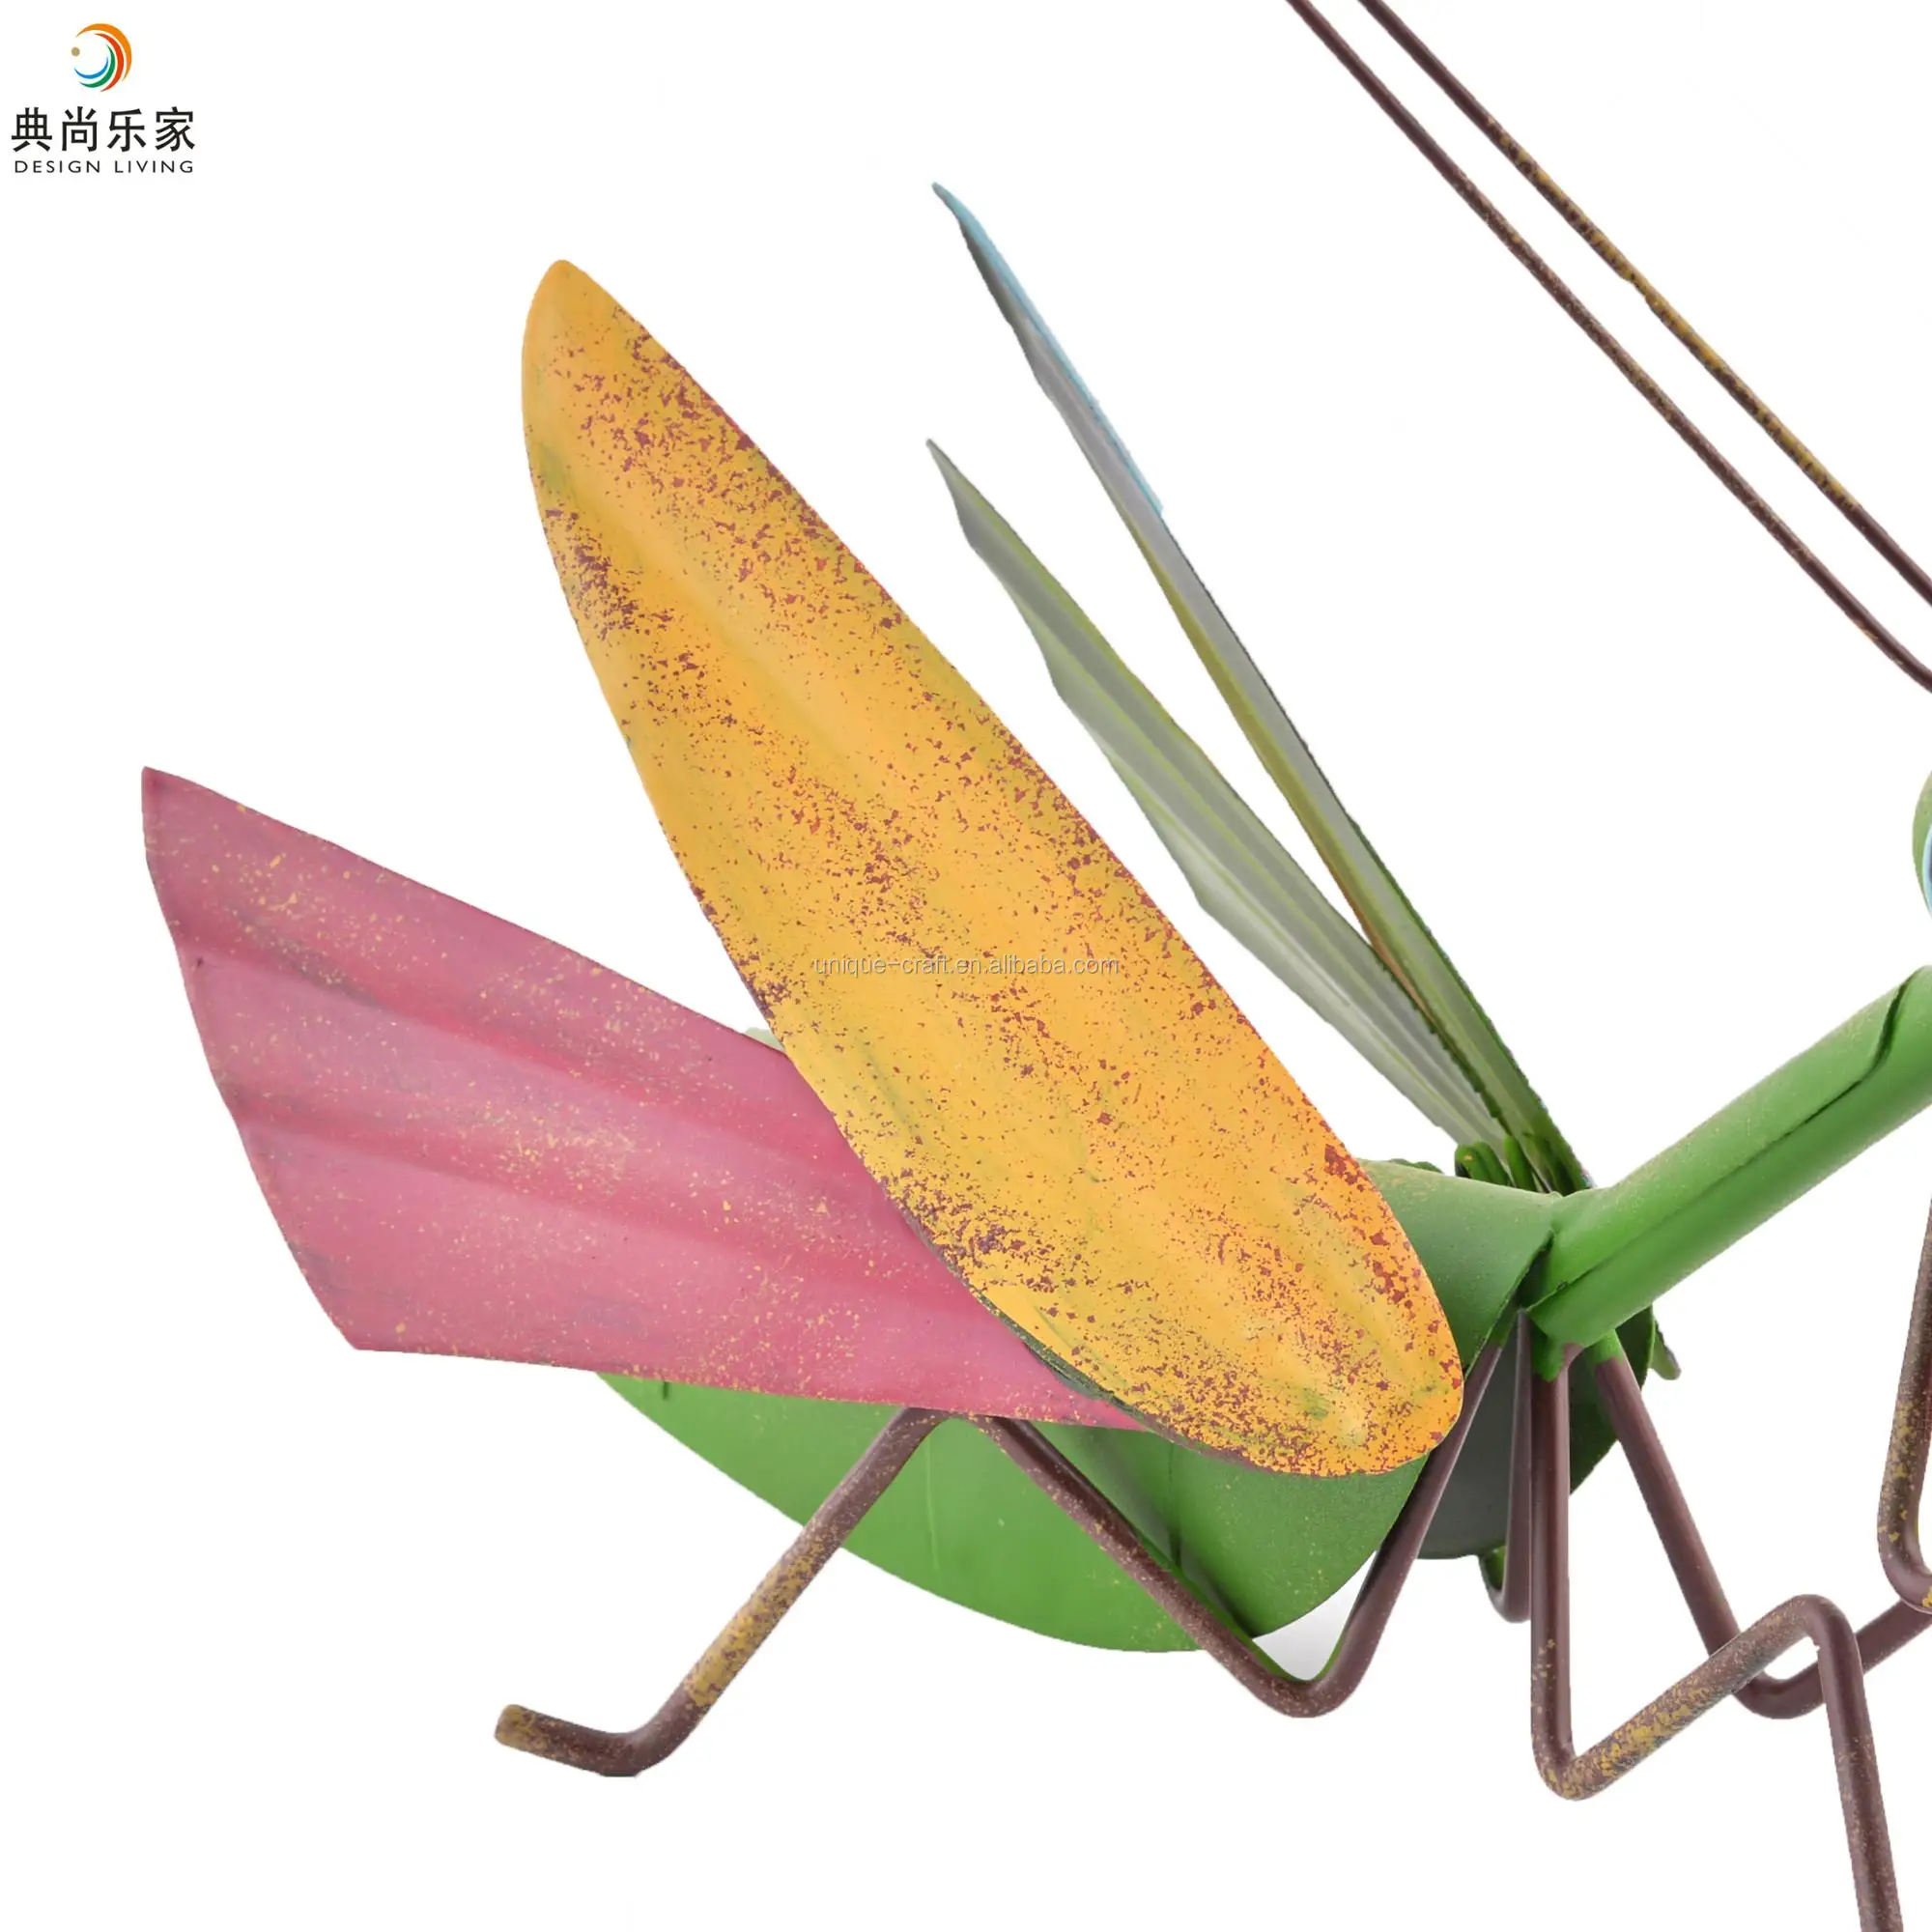 New Product Metal Garden Mantis Insect Decoration Ornaments